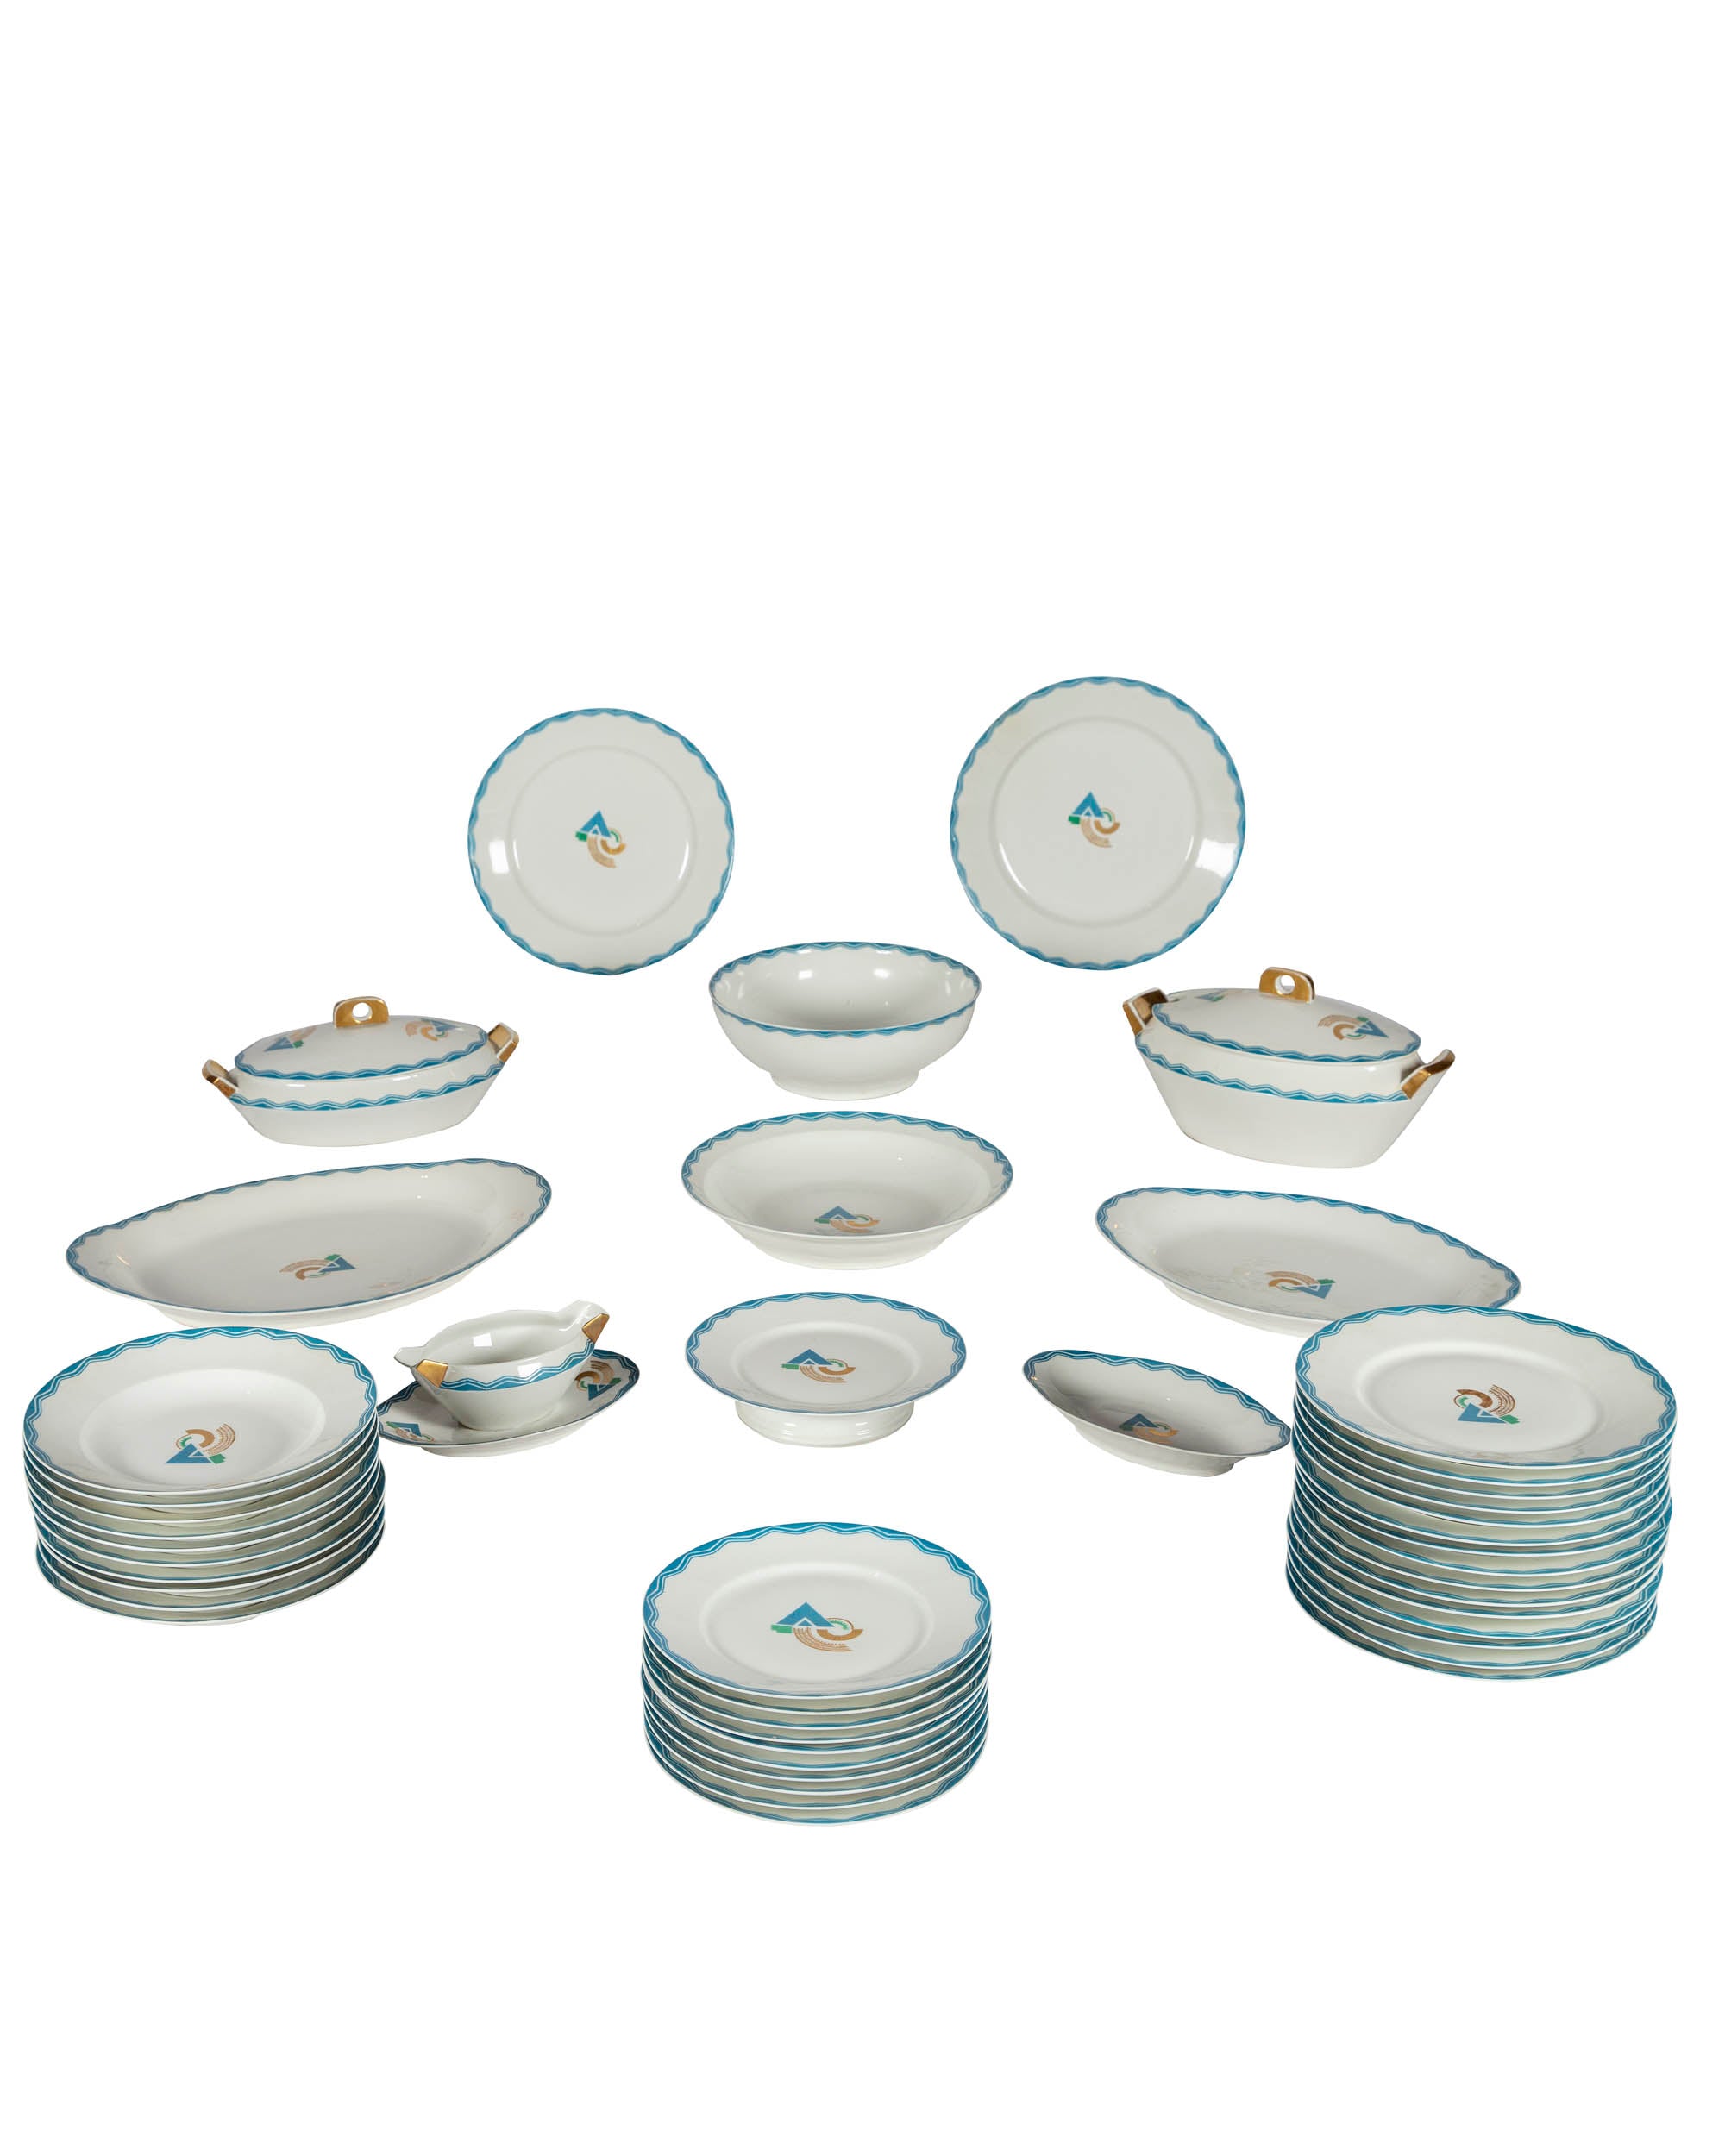 Porcelain tableware from Limoges A.F. Art Deco style. Created around 1925. 56 pieces